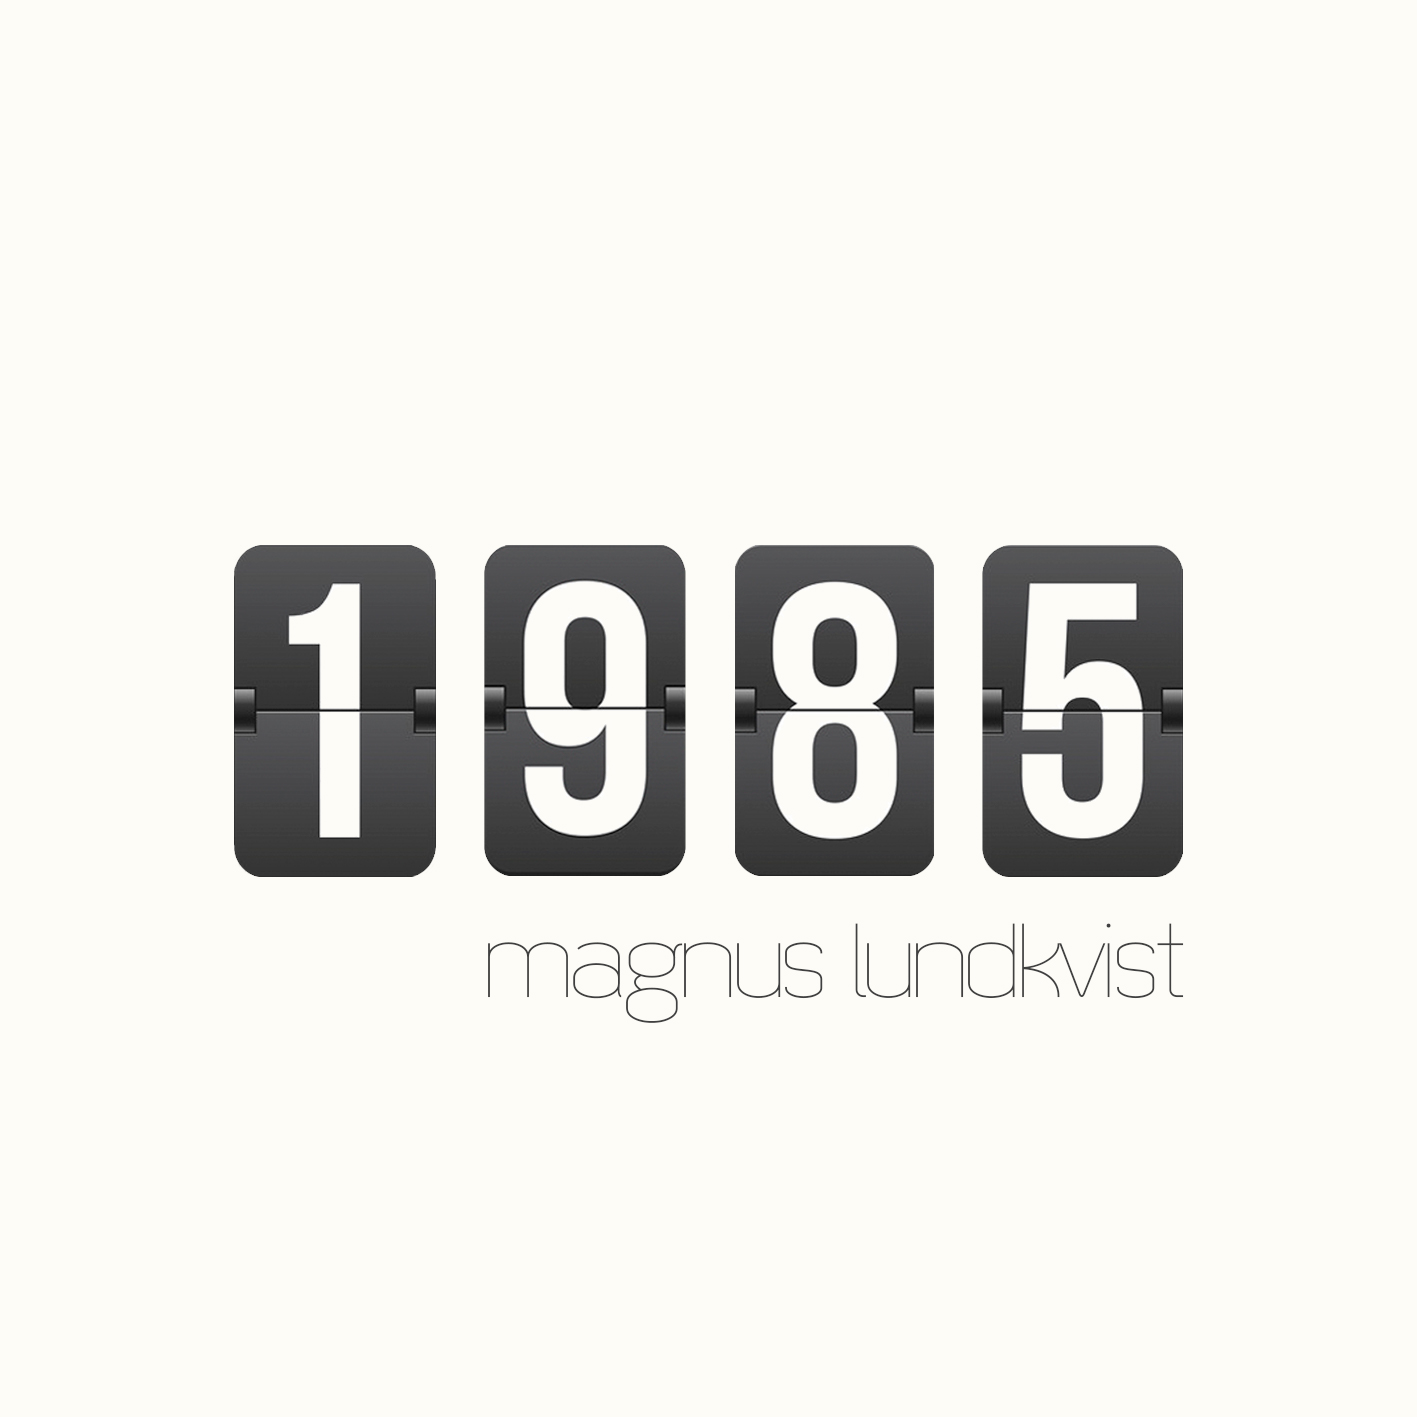 1985 – New single out July 8